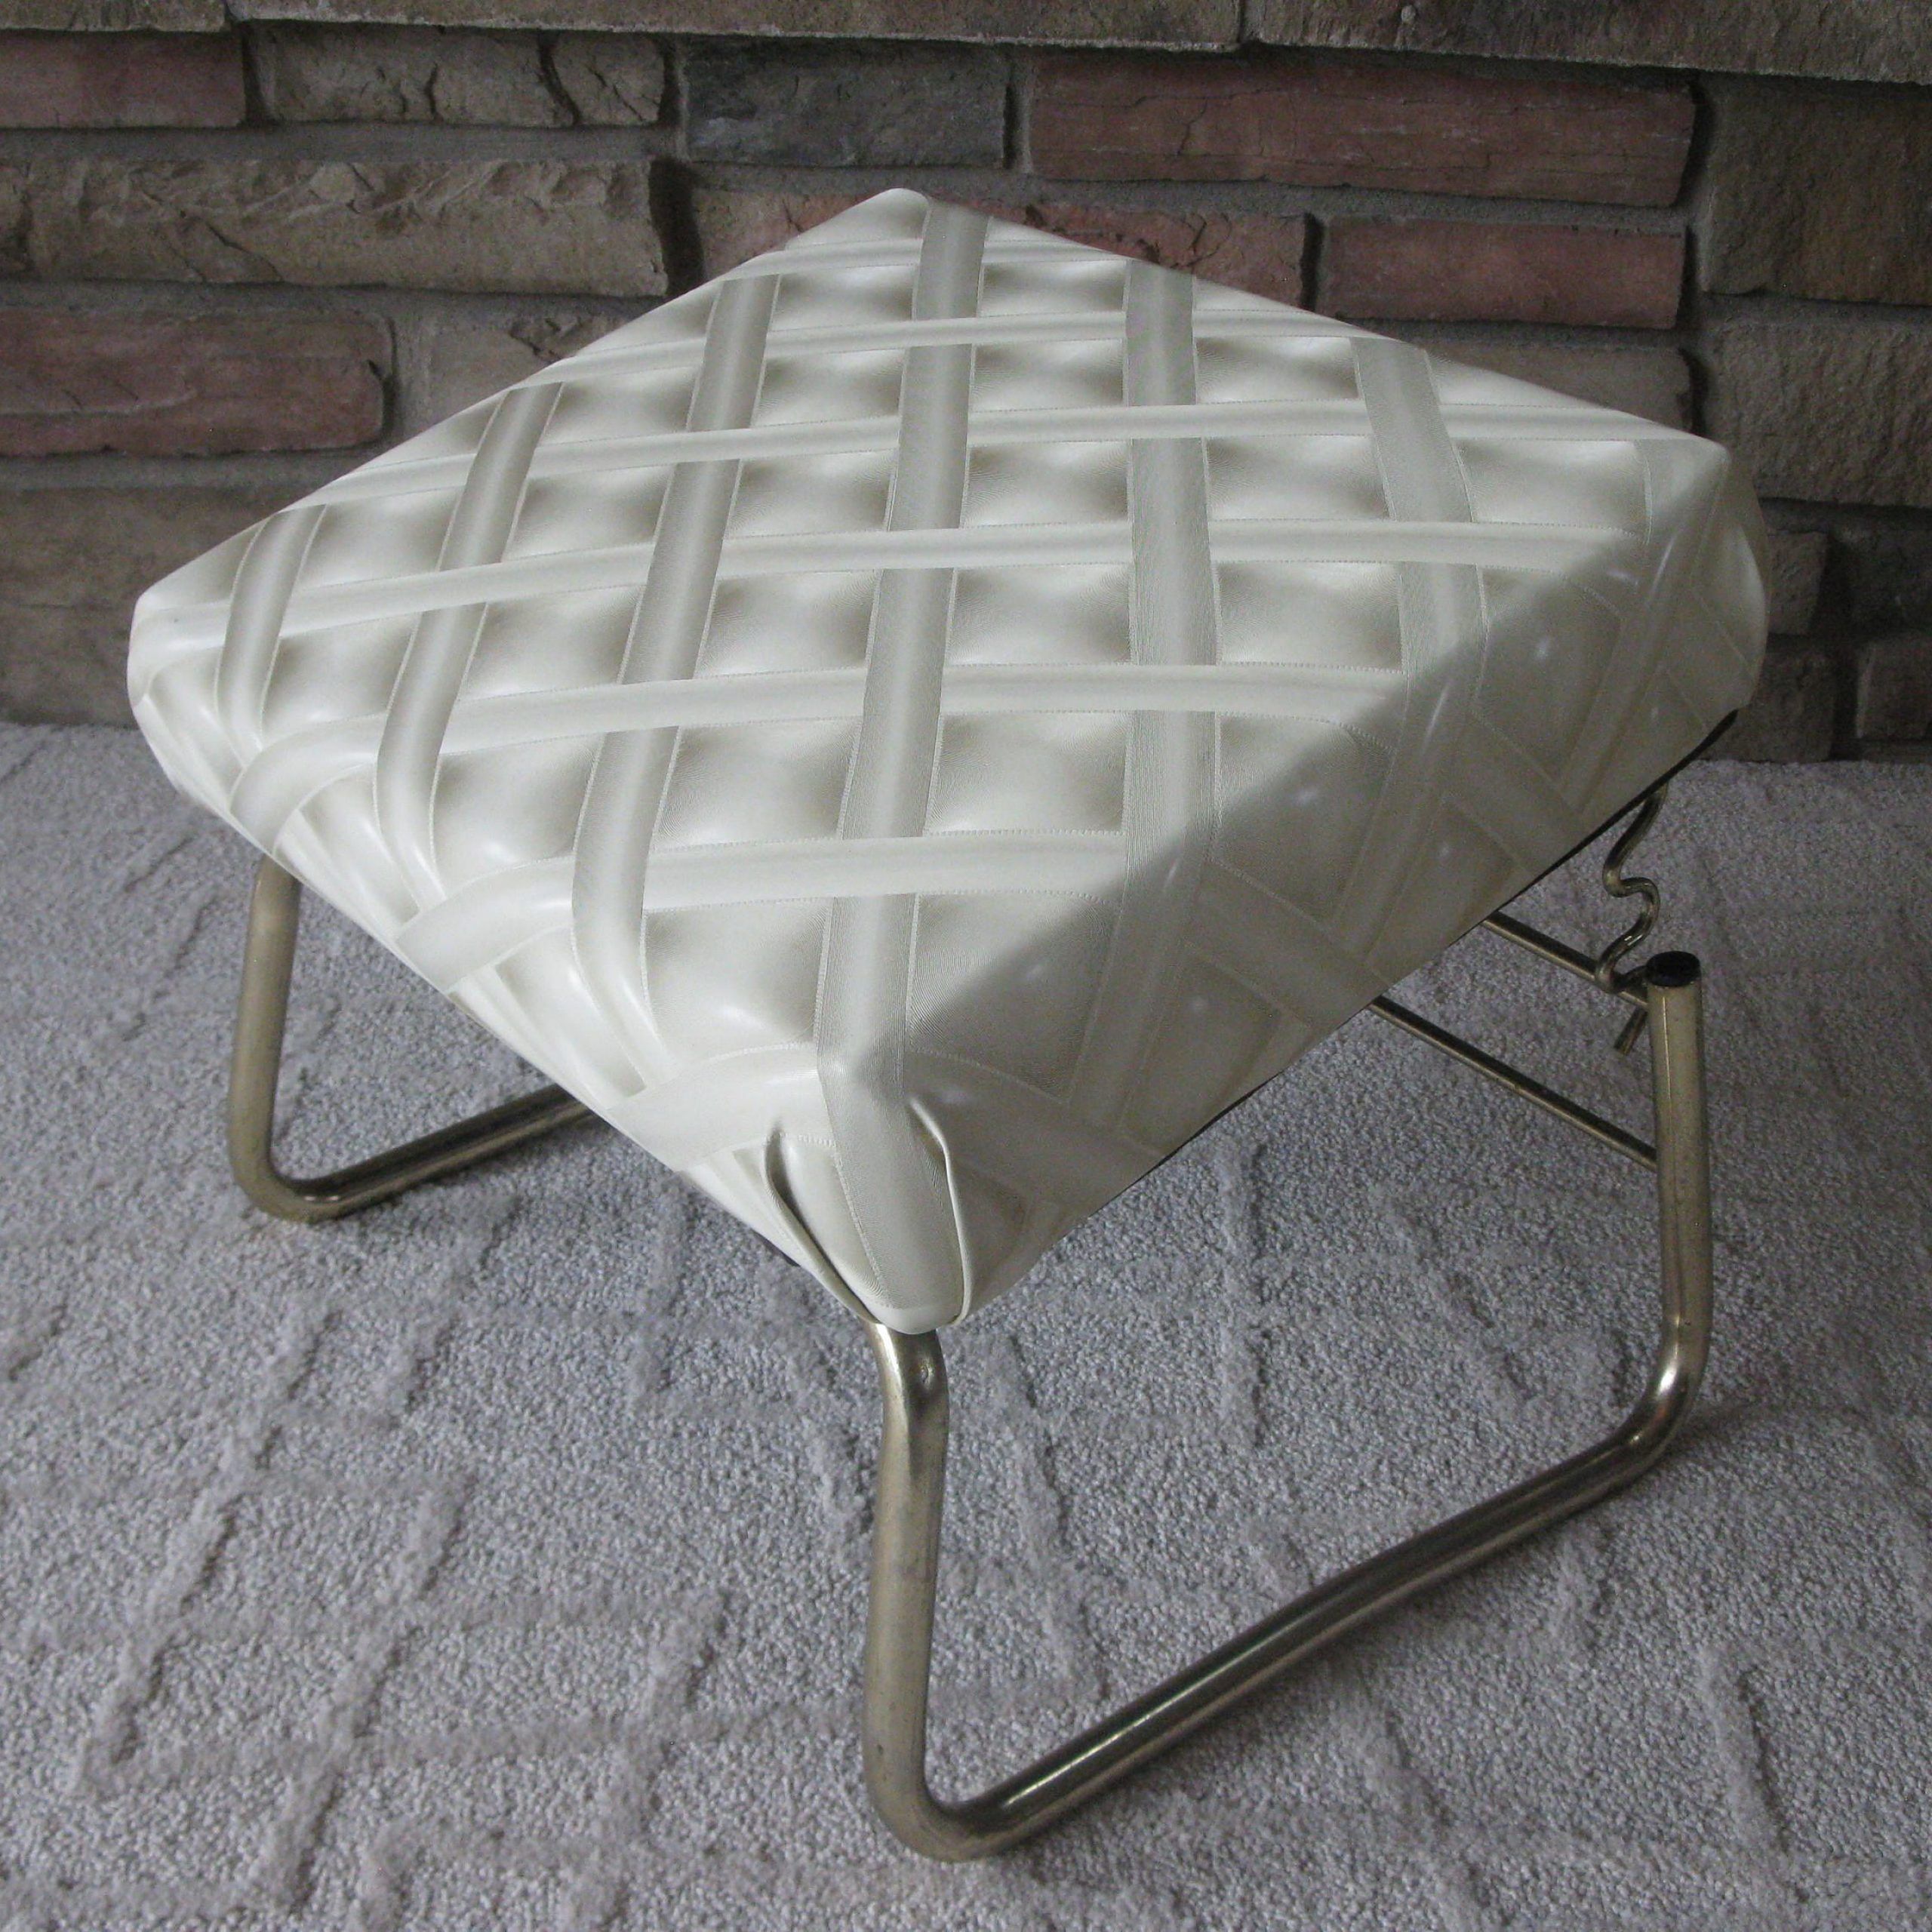 Retro Pearl Wick Leg Lounger  Ottoman  Beige  Adjustable Footstool Intended For Beige And White Tall Cylinder Pouf Ottomans (Gallery 19 of 20)